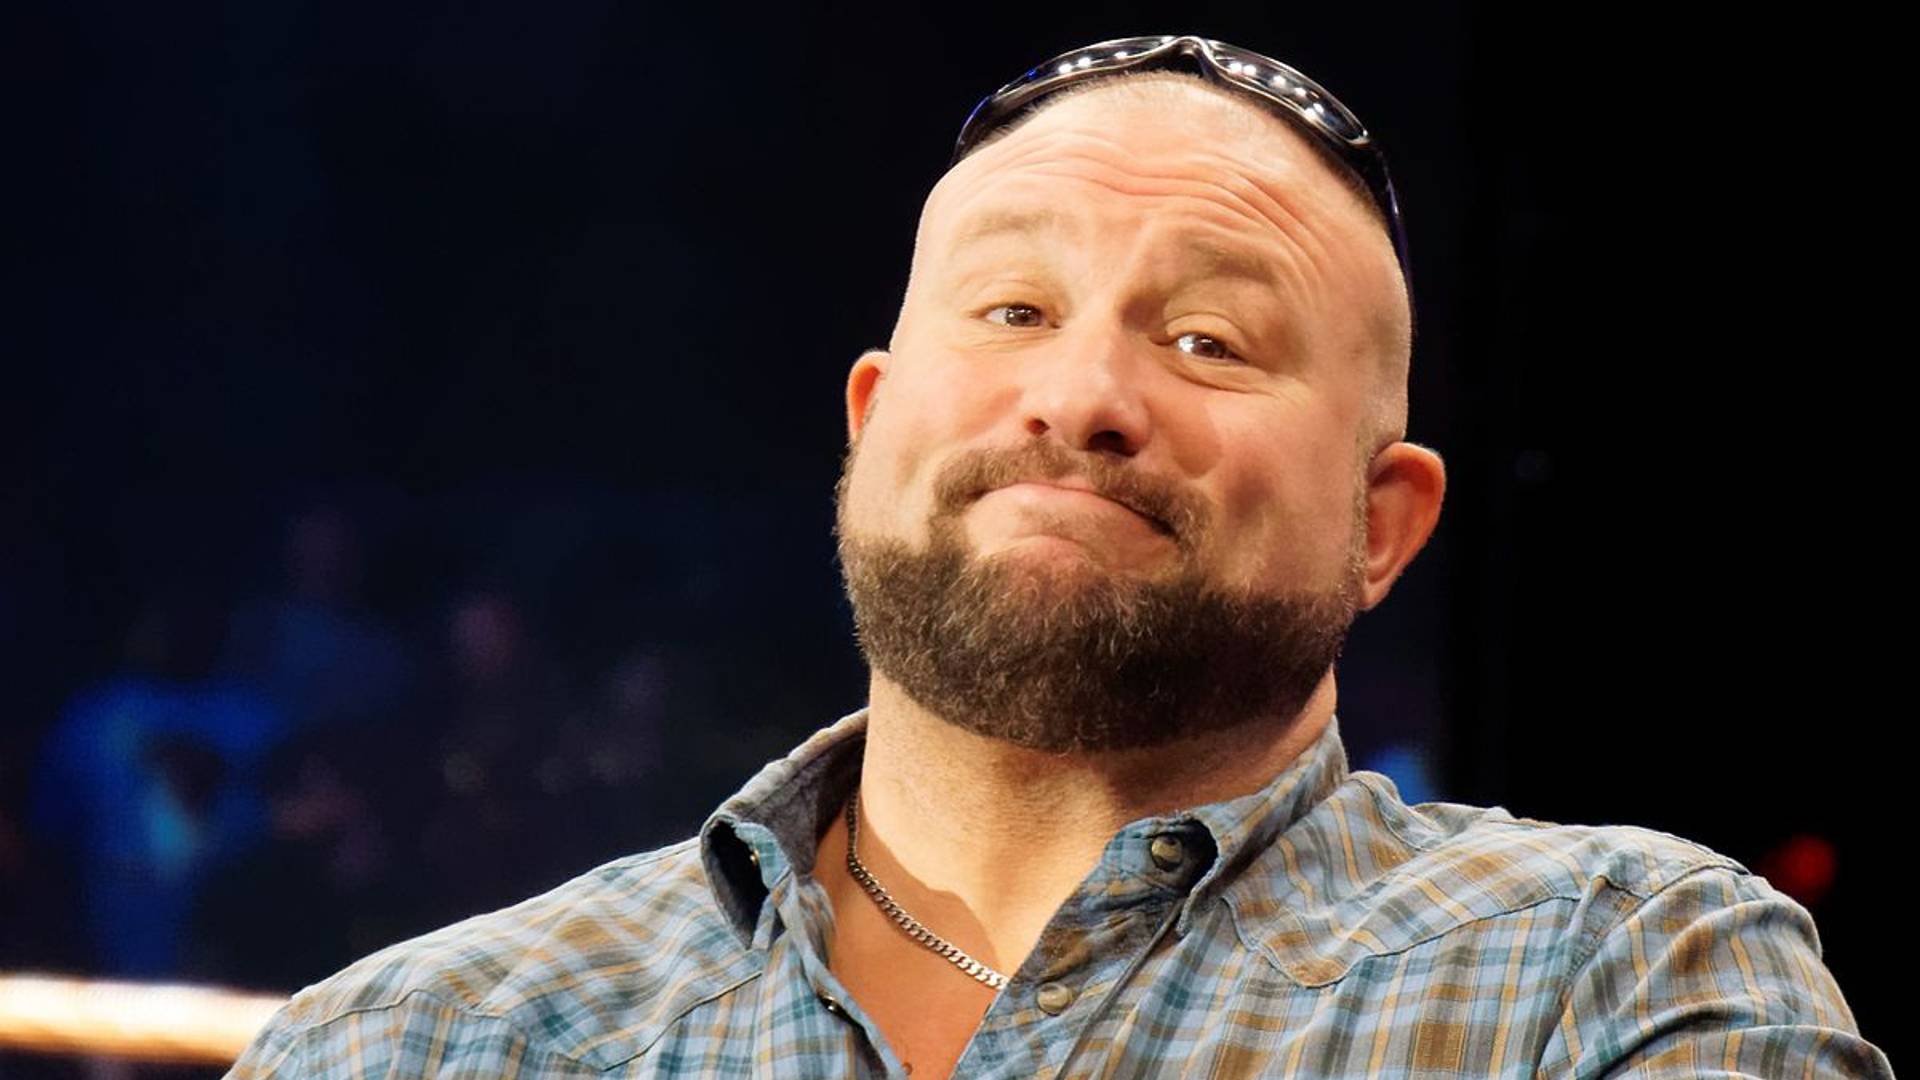 18-facts-about-bubba-ray-dudley